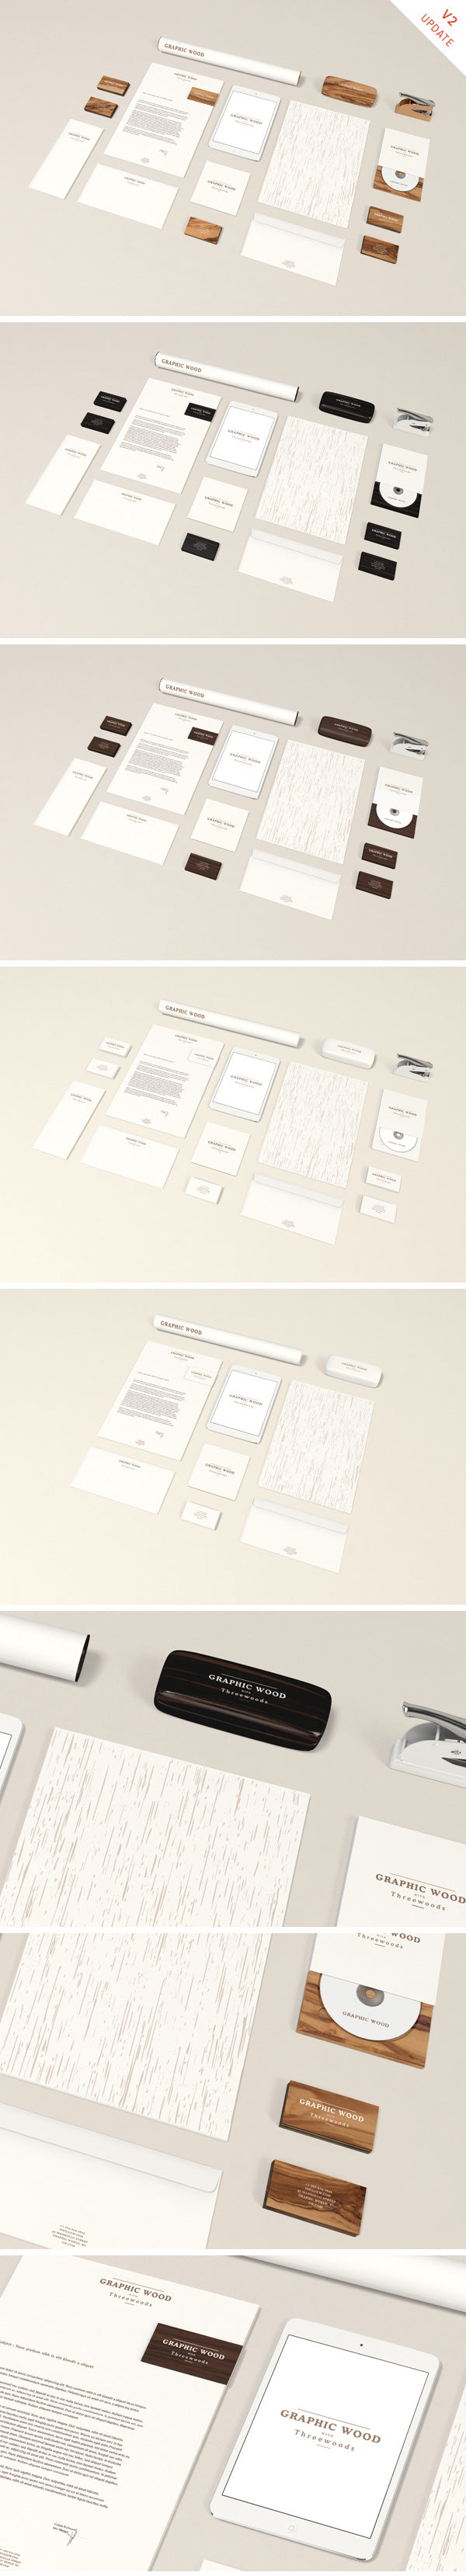 Free Stationery MockUp with Wooden Textures